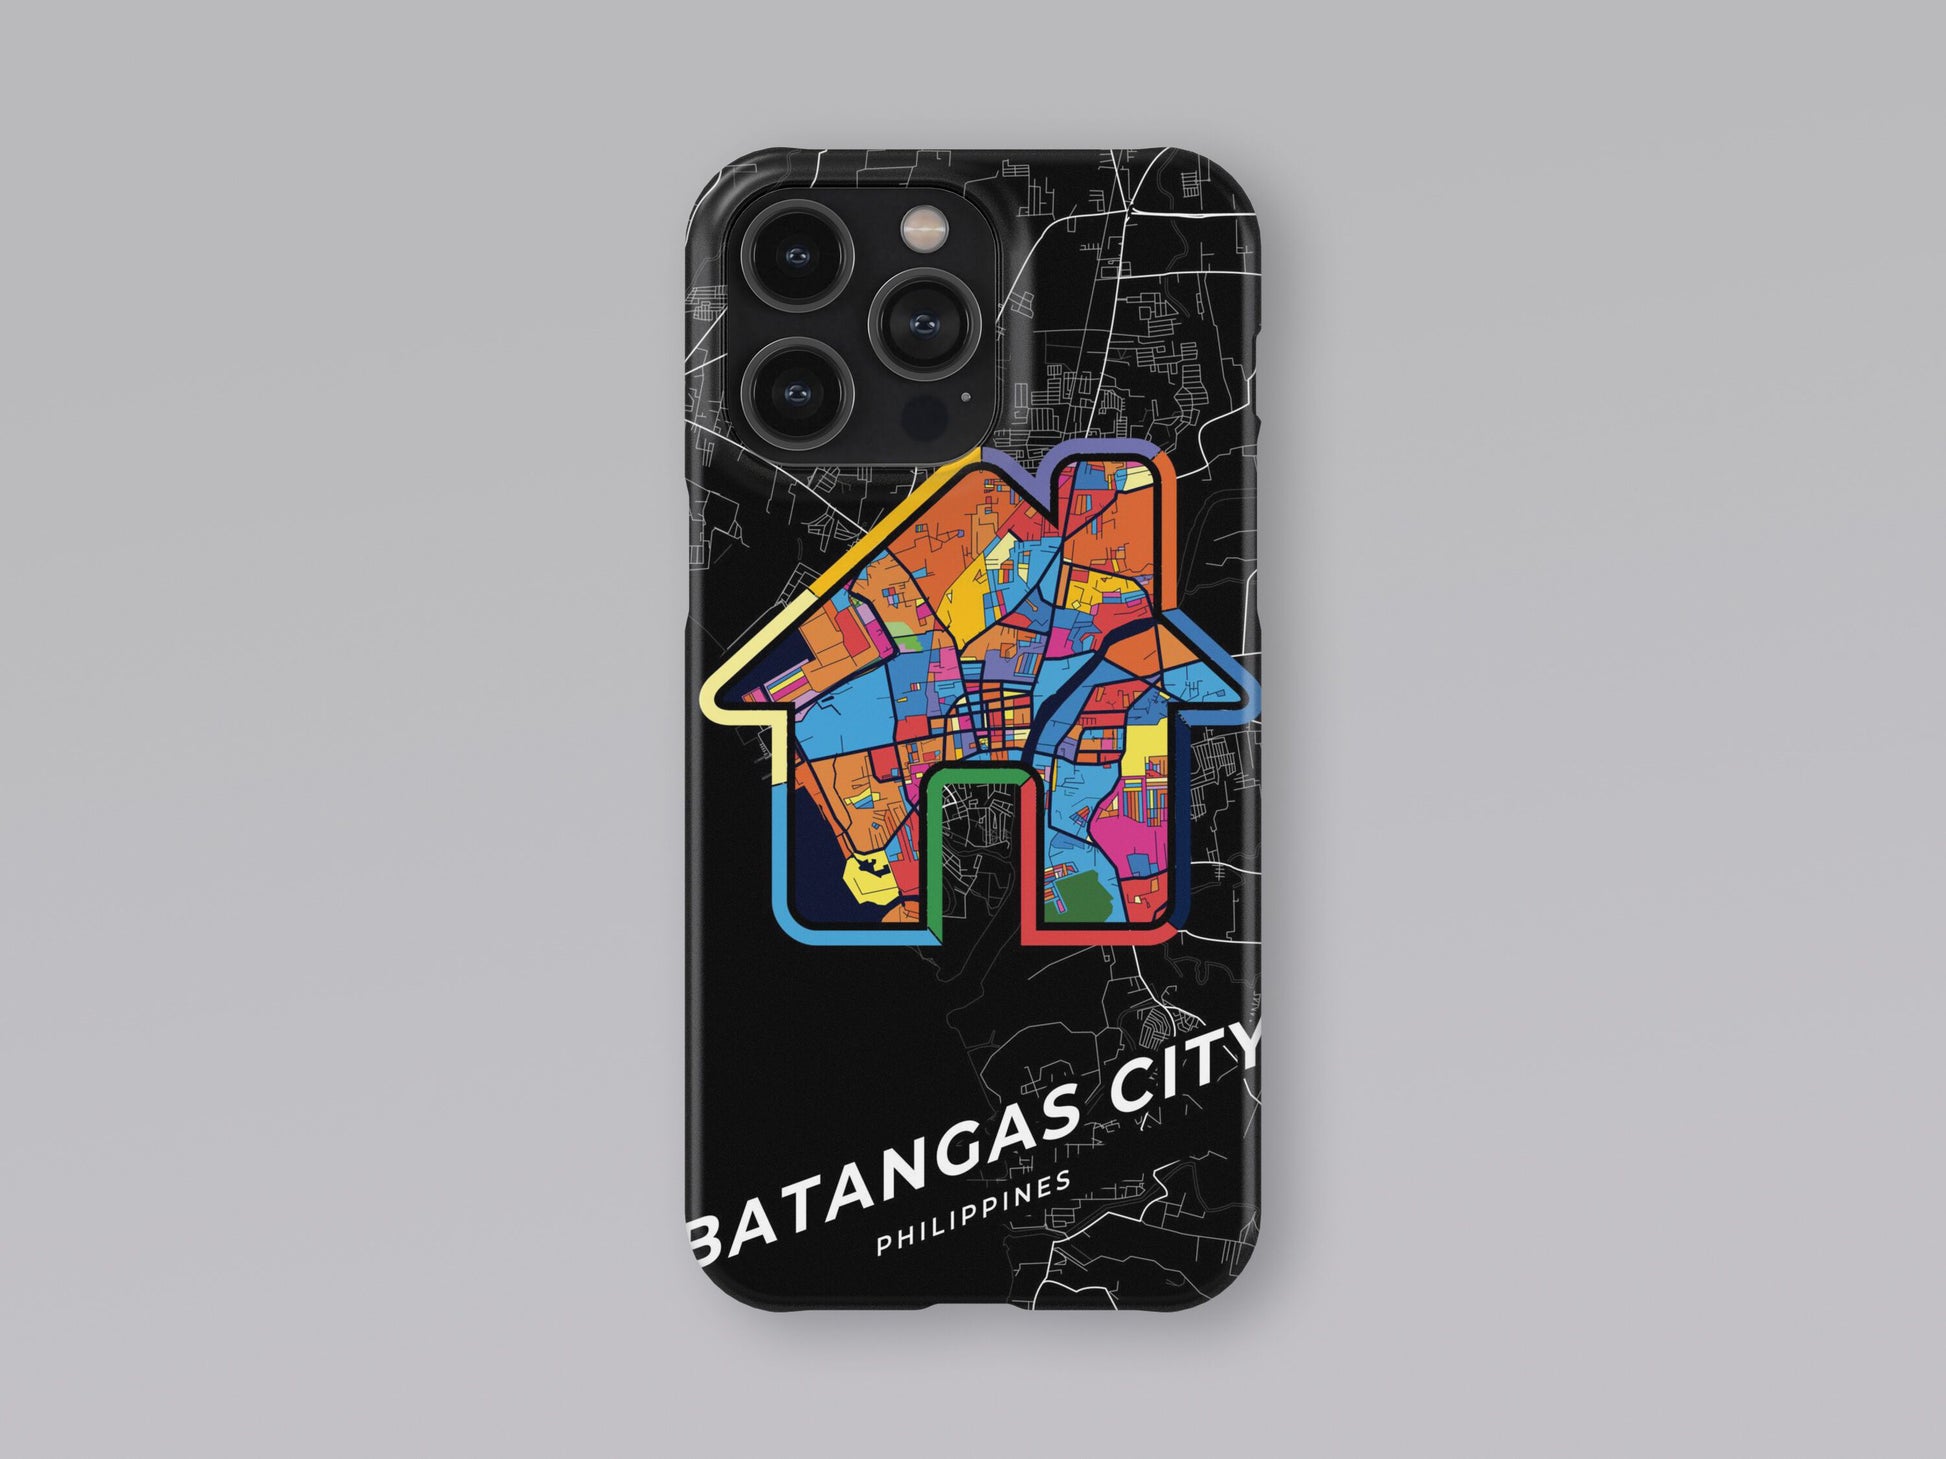 Batangas City Philippines slim phone case with colorful icon. Birthday, wedding or housewarming gift. Couple match cases. 3